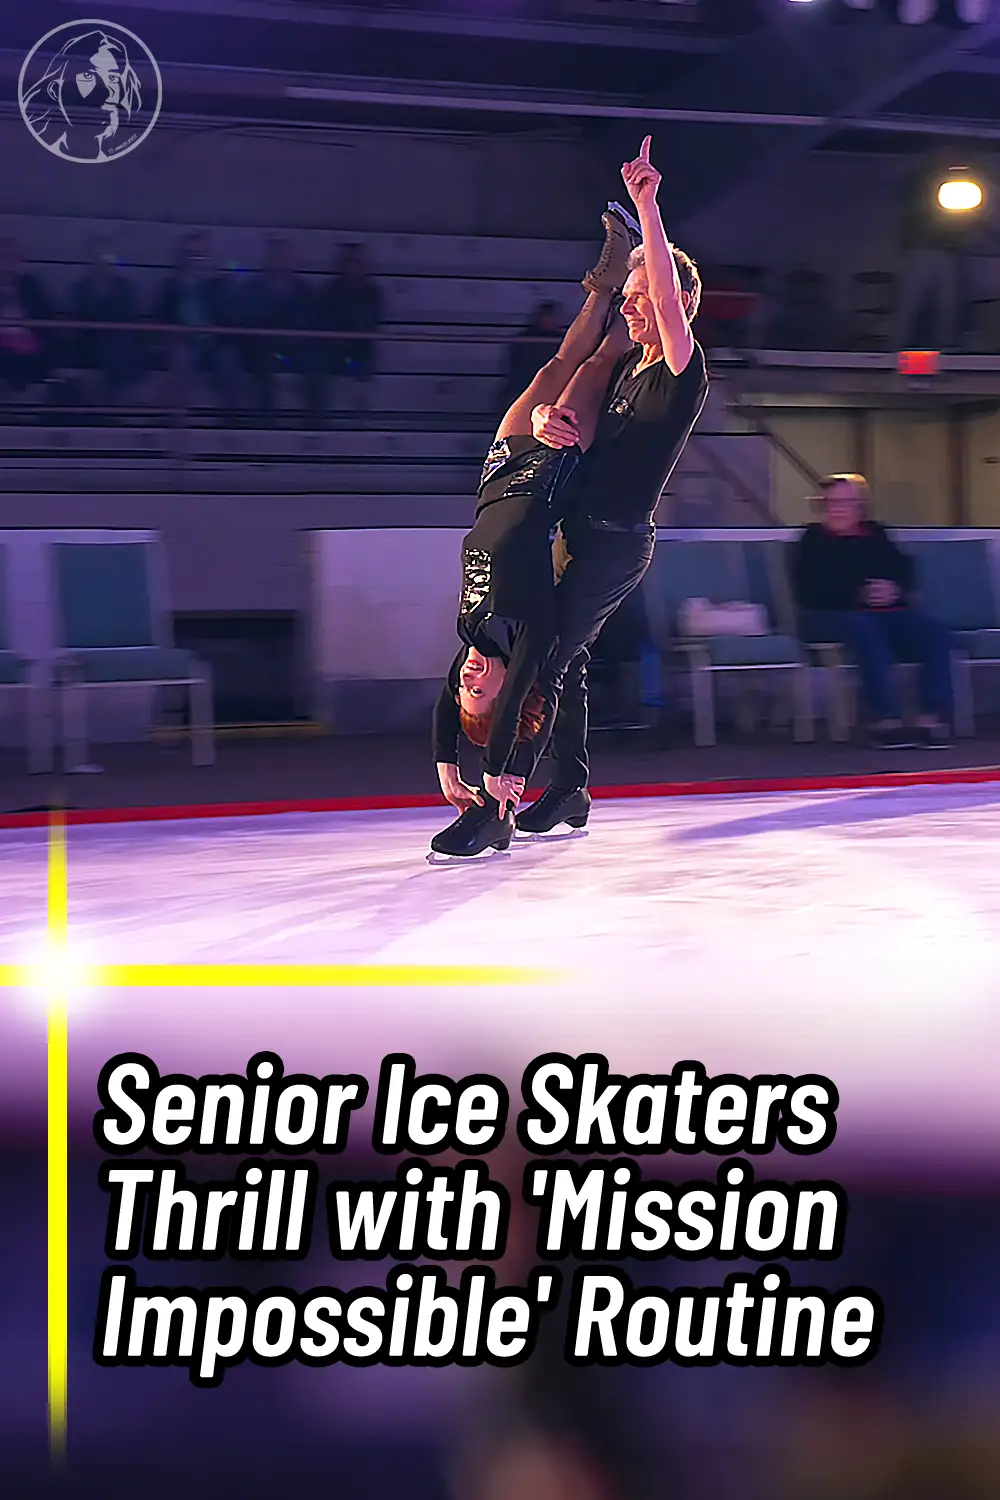 Senior Ice Skaters Thrill with \'Mission Impossible\' Routine